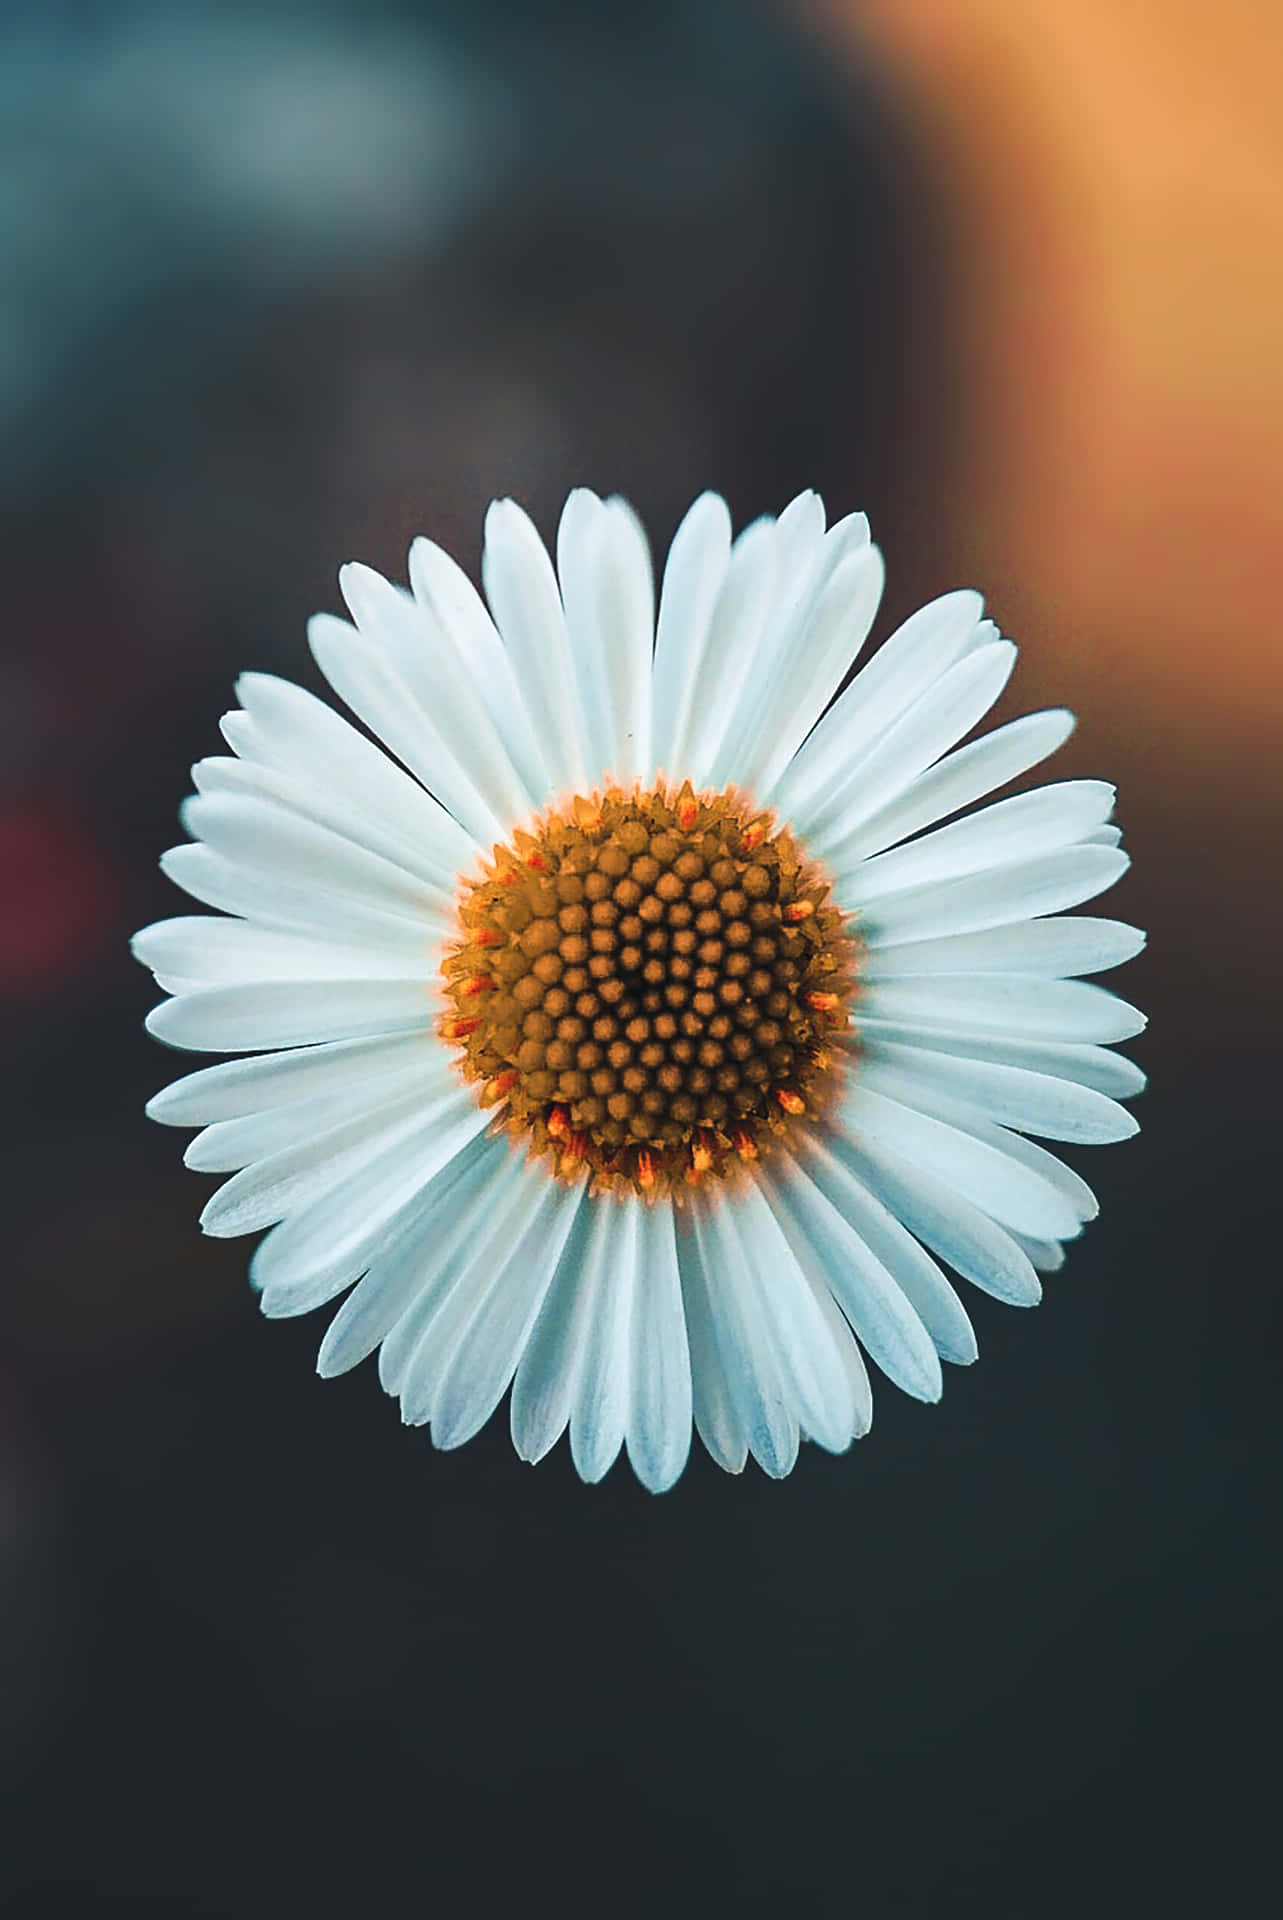 Download Bloom Of Youth - A Close-up View Of A Single Daisy Against An  Ethereal Sky-like Background